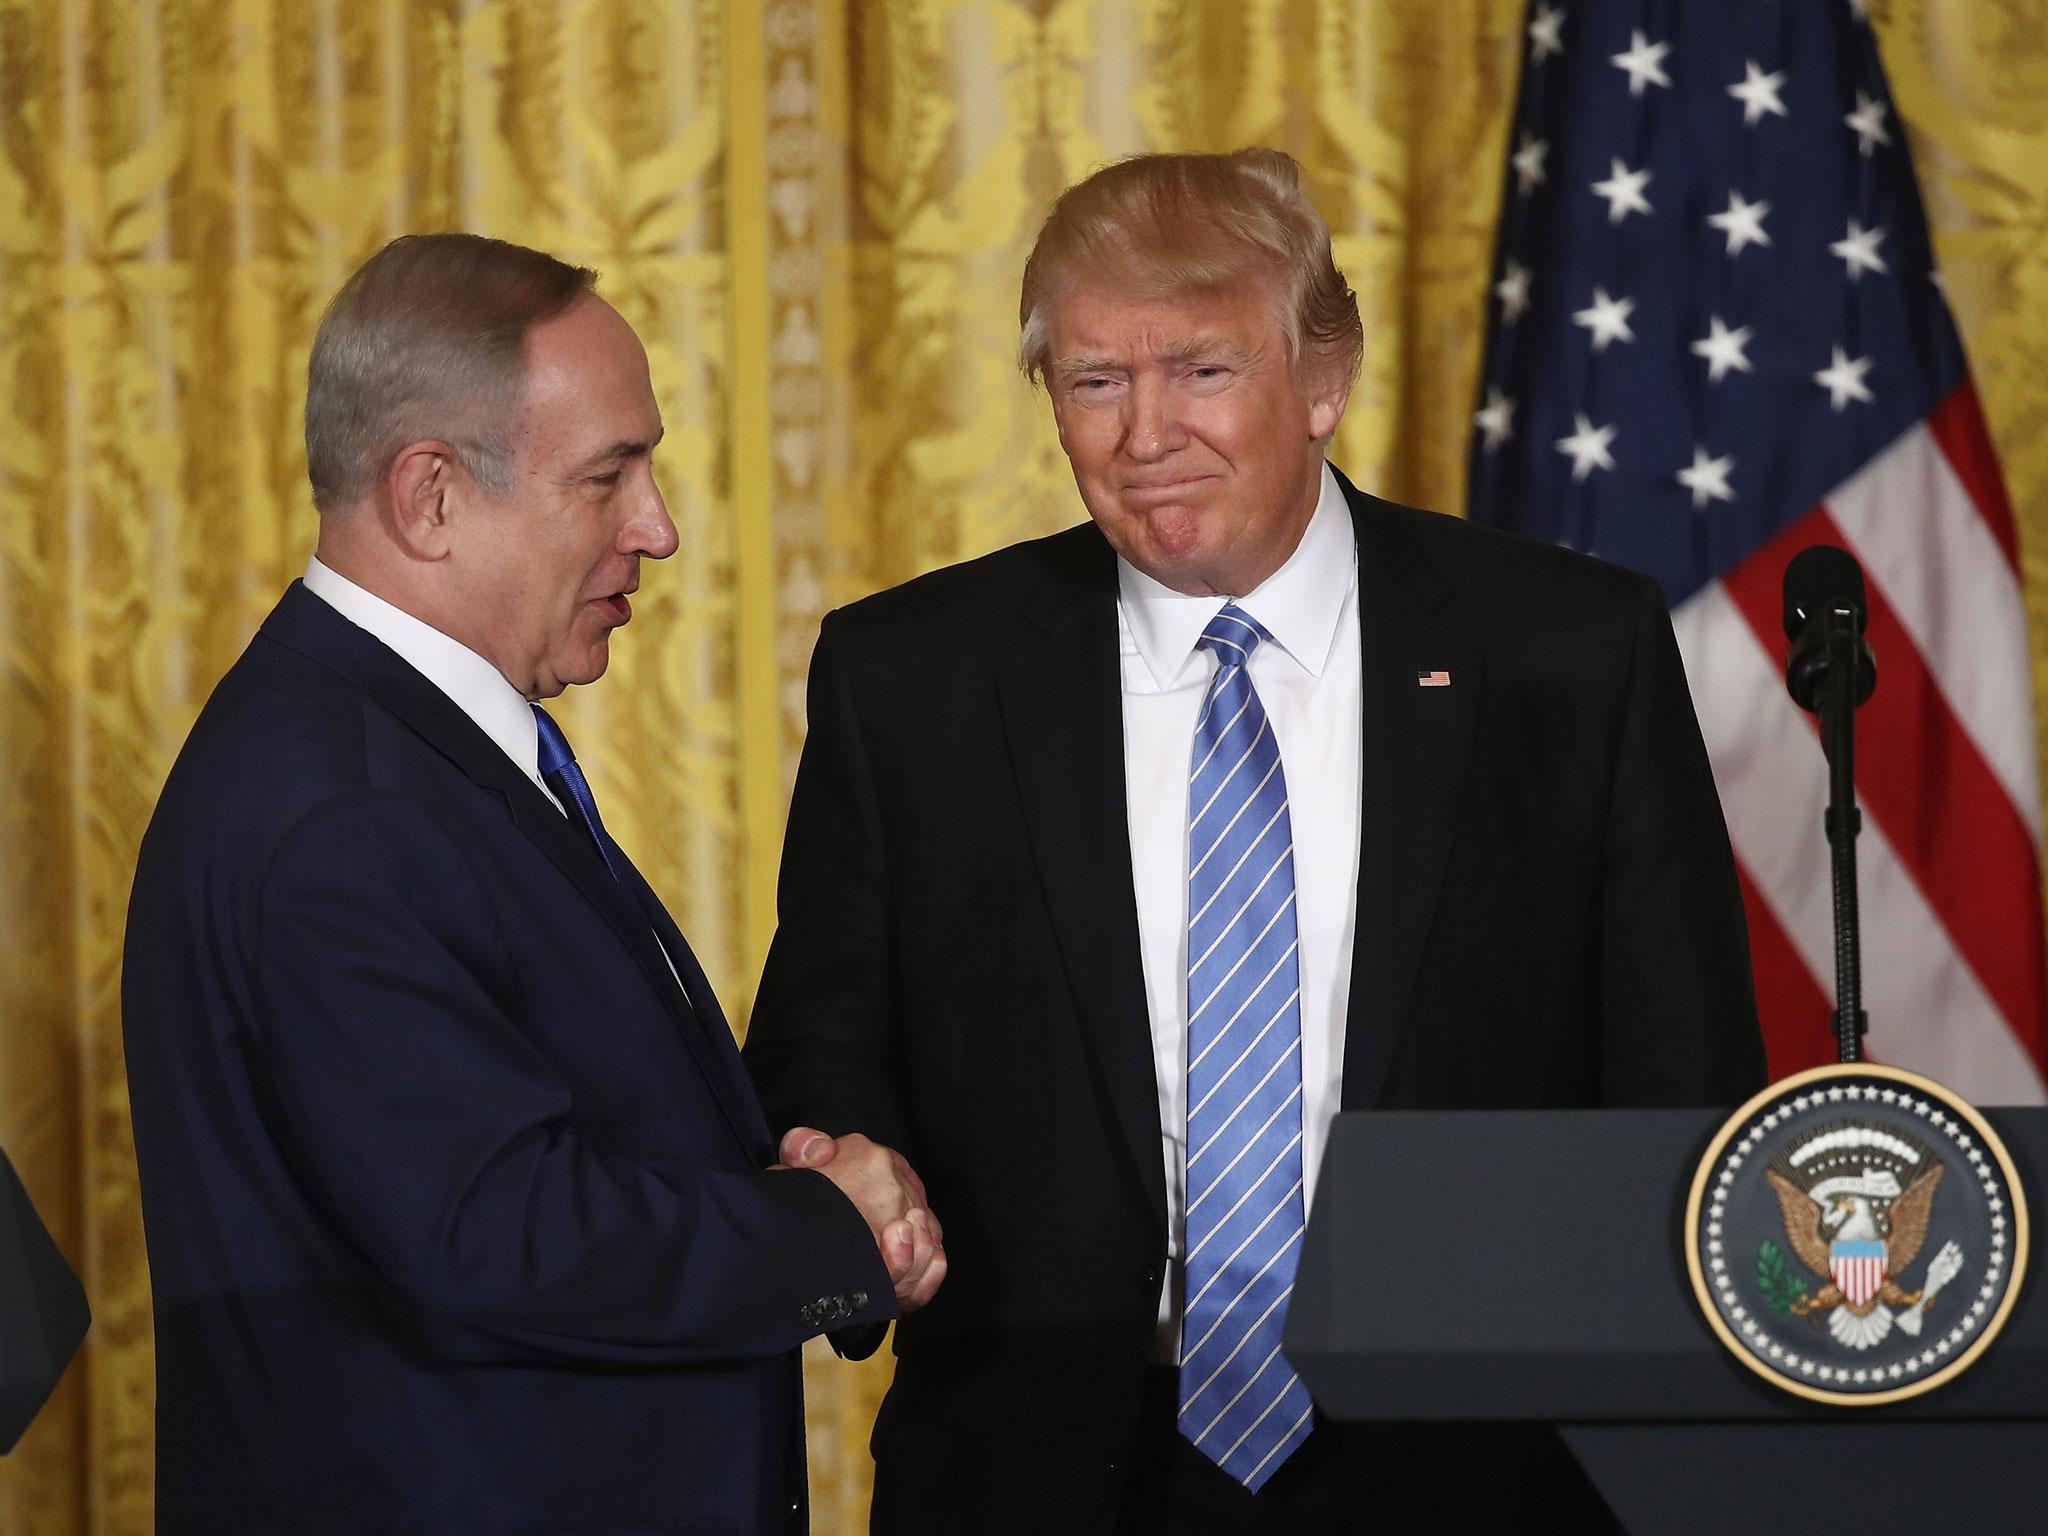 Mr Trump did not explicitly embrace a two-state solution to the Israeli-Palestinian conflict when he met with Israeli Prime Minister Benjamin Netanyahu last month